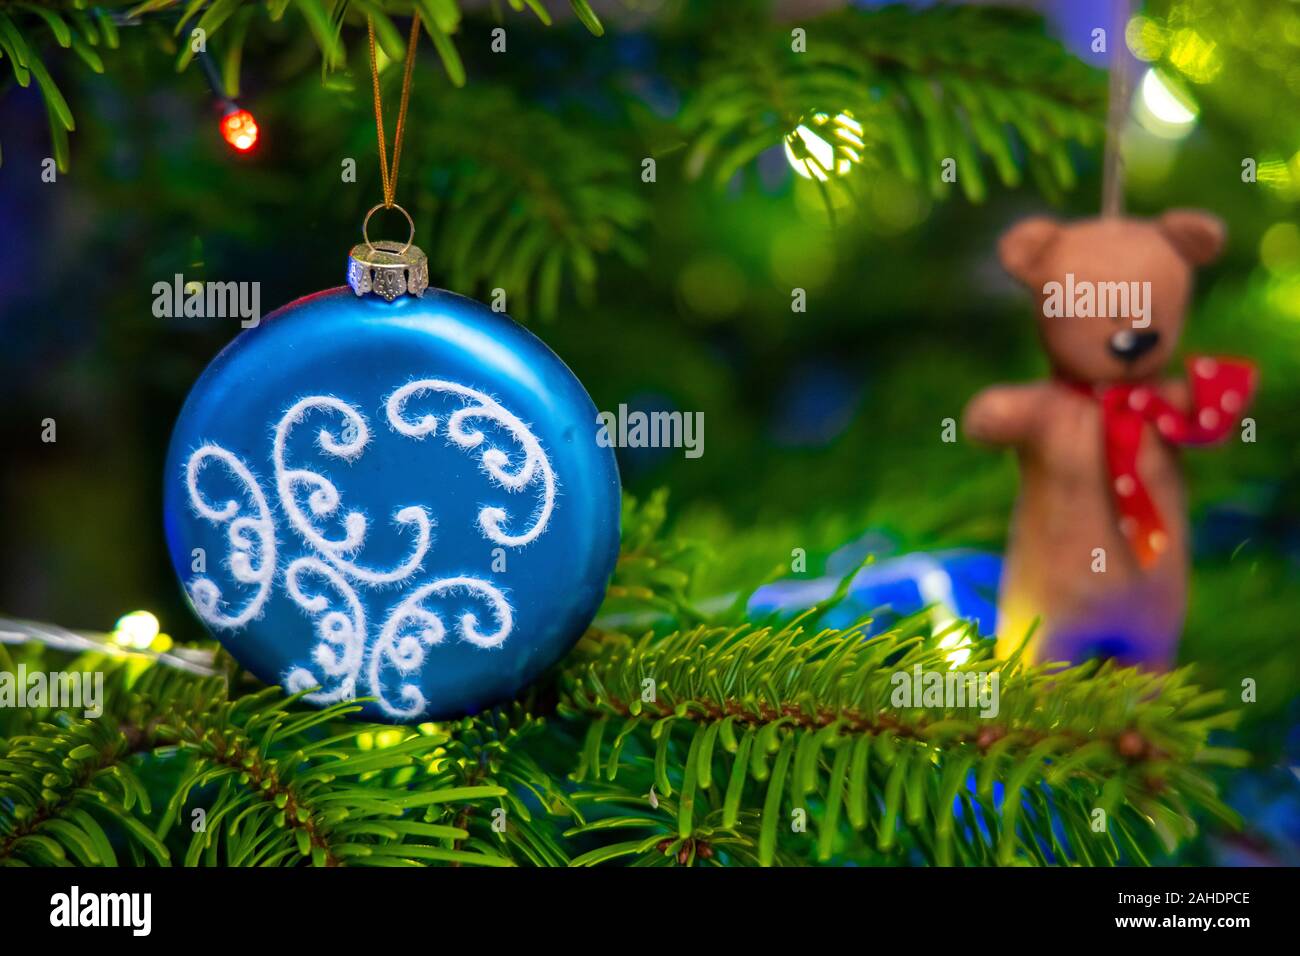 Vintage toys on a Christmas tree close-up, holiday traditions. Small depth of field Stock Photo